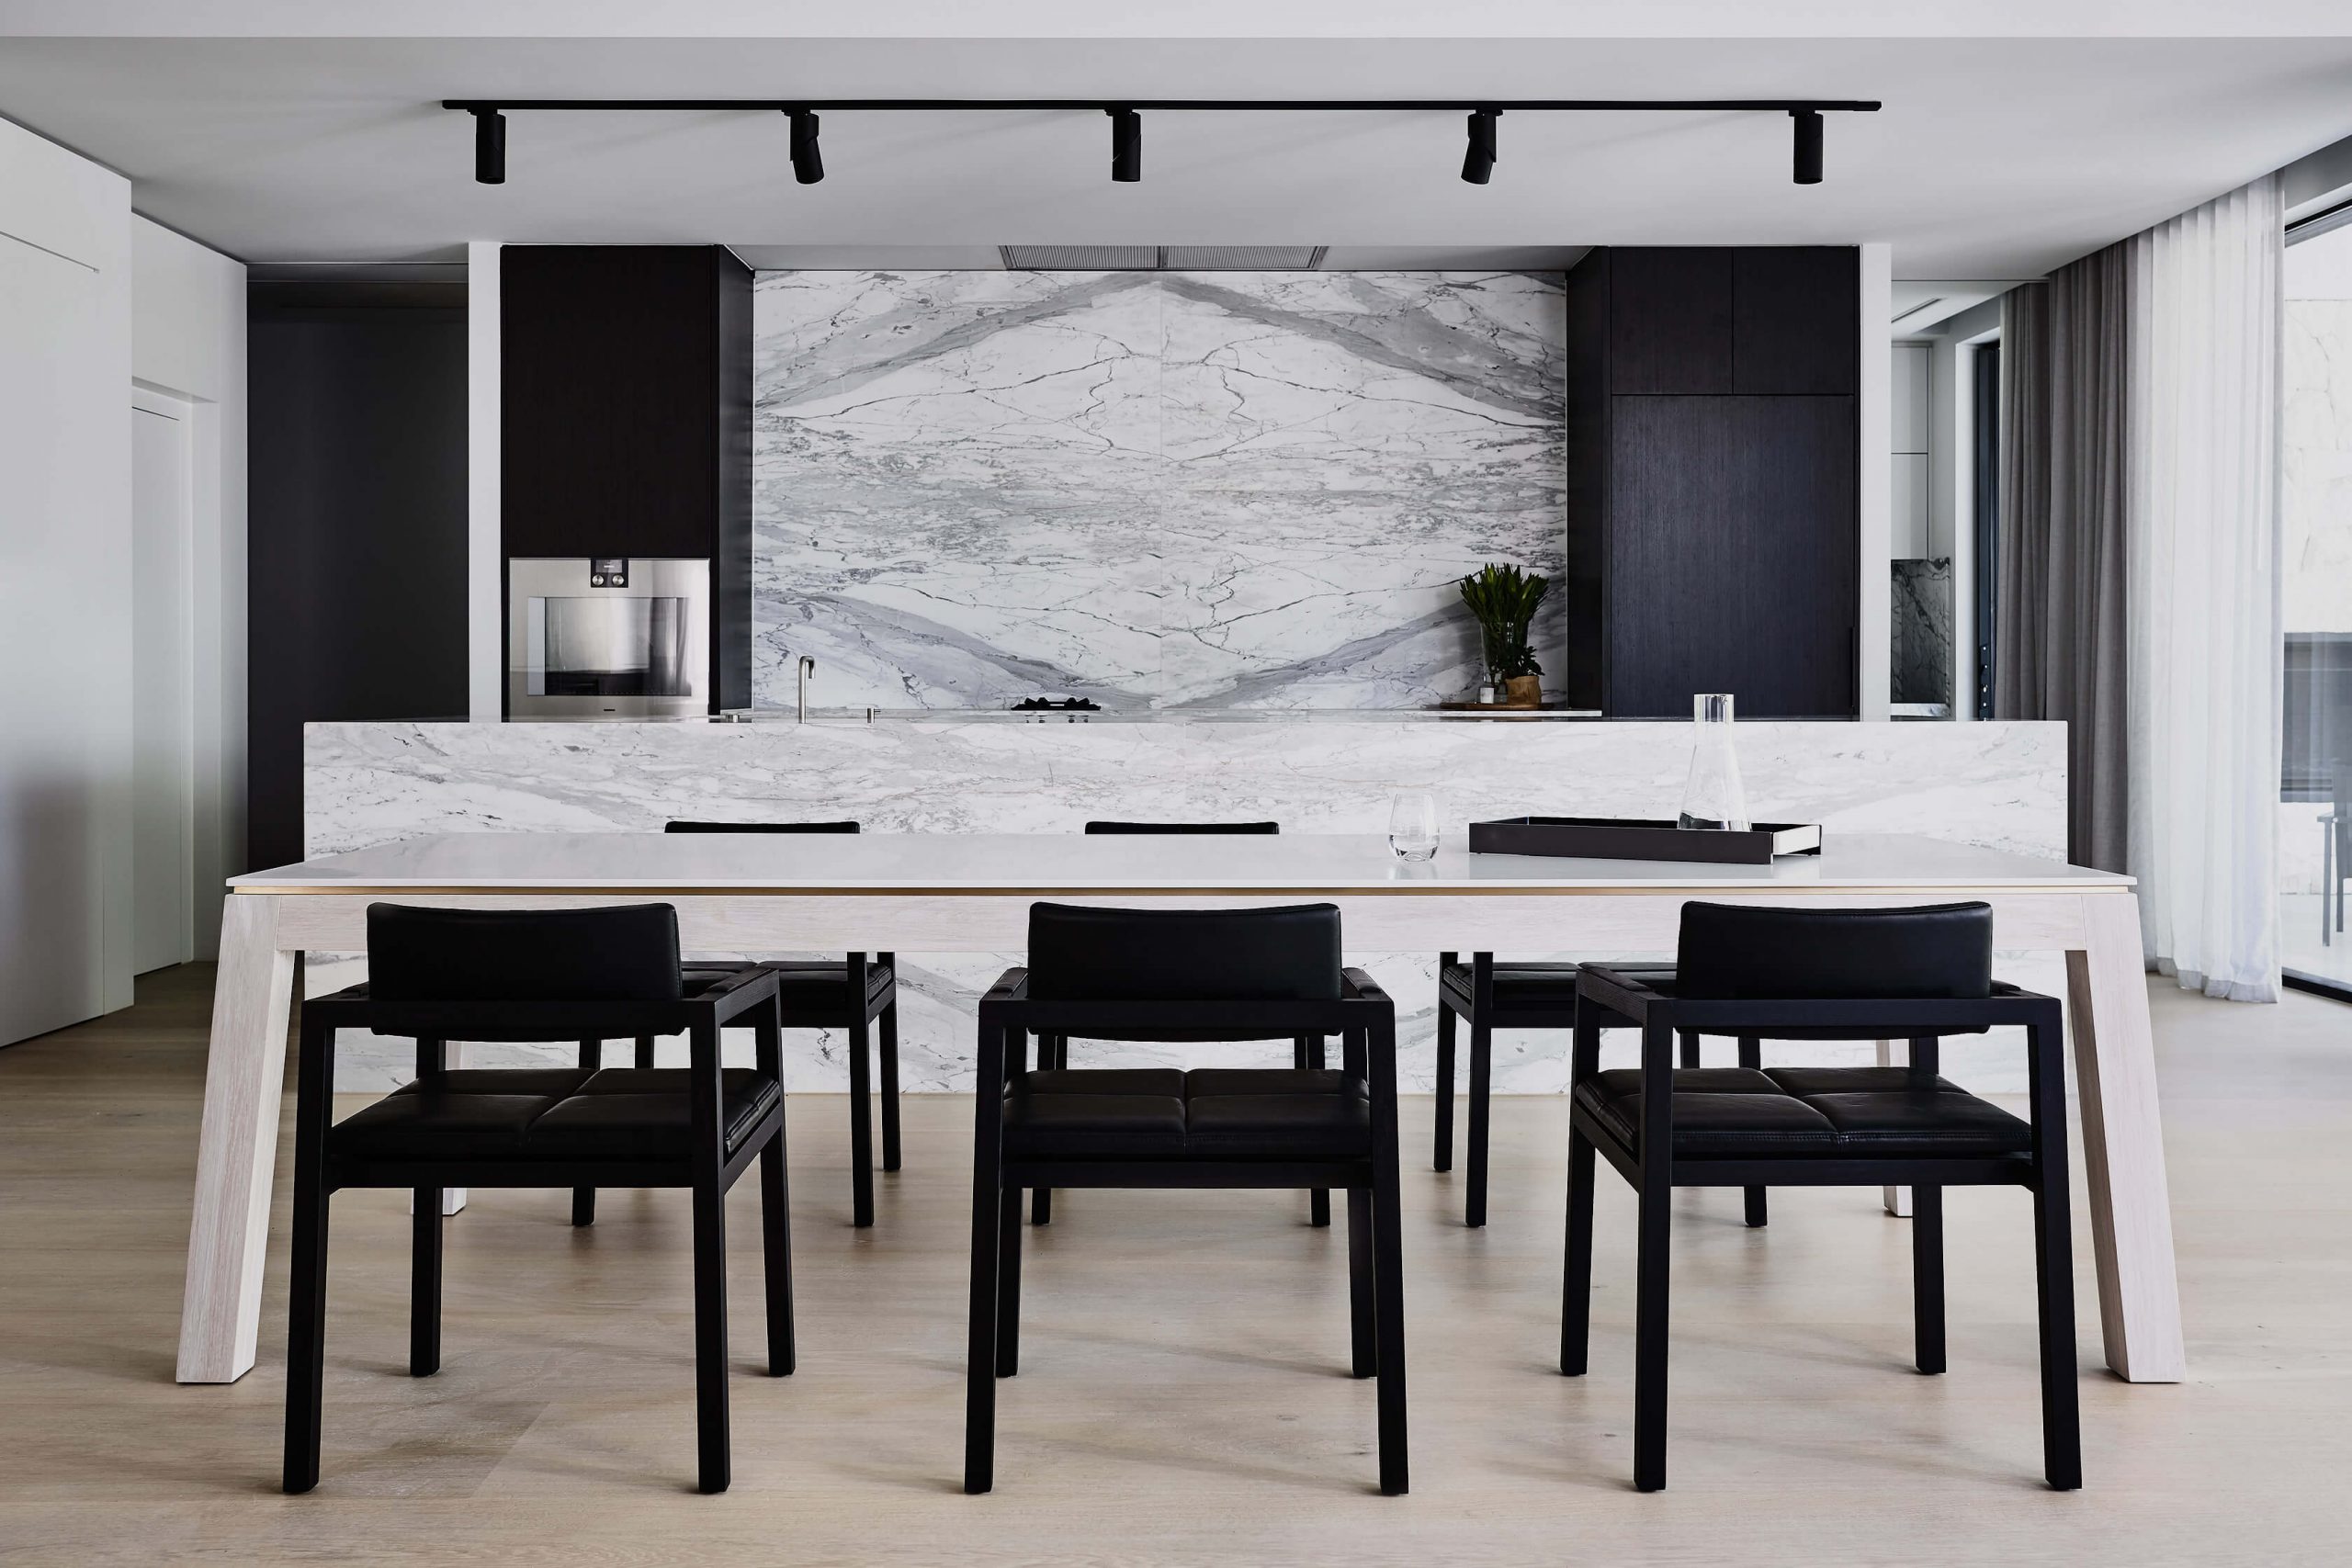 As you walk through this incredible architectural Australian home you immediately are drawn to sit and rest at the designer dining table by Australian designer FrancoCrea